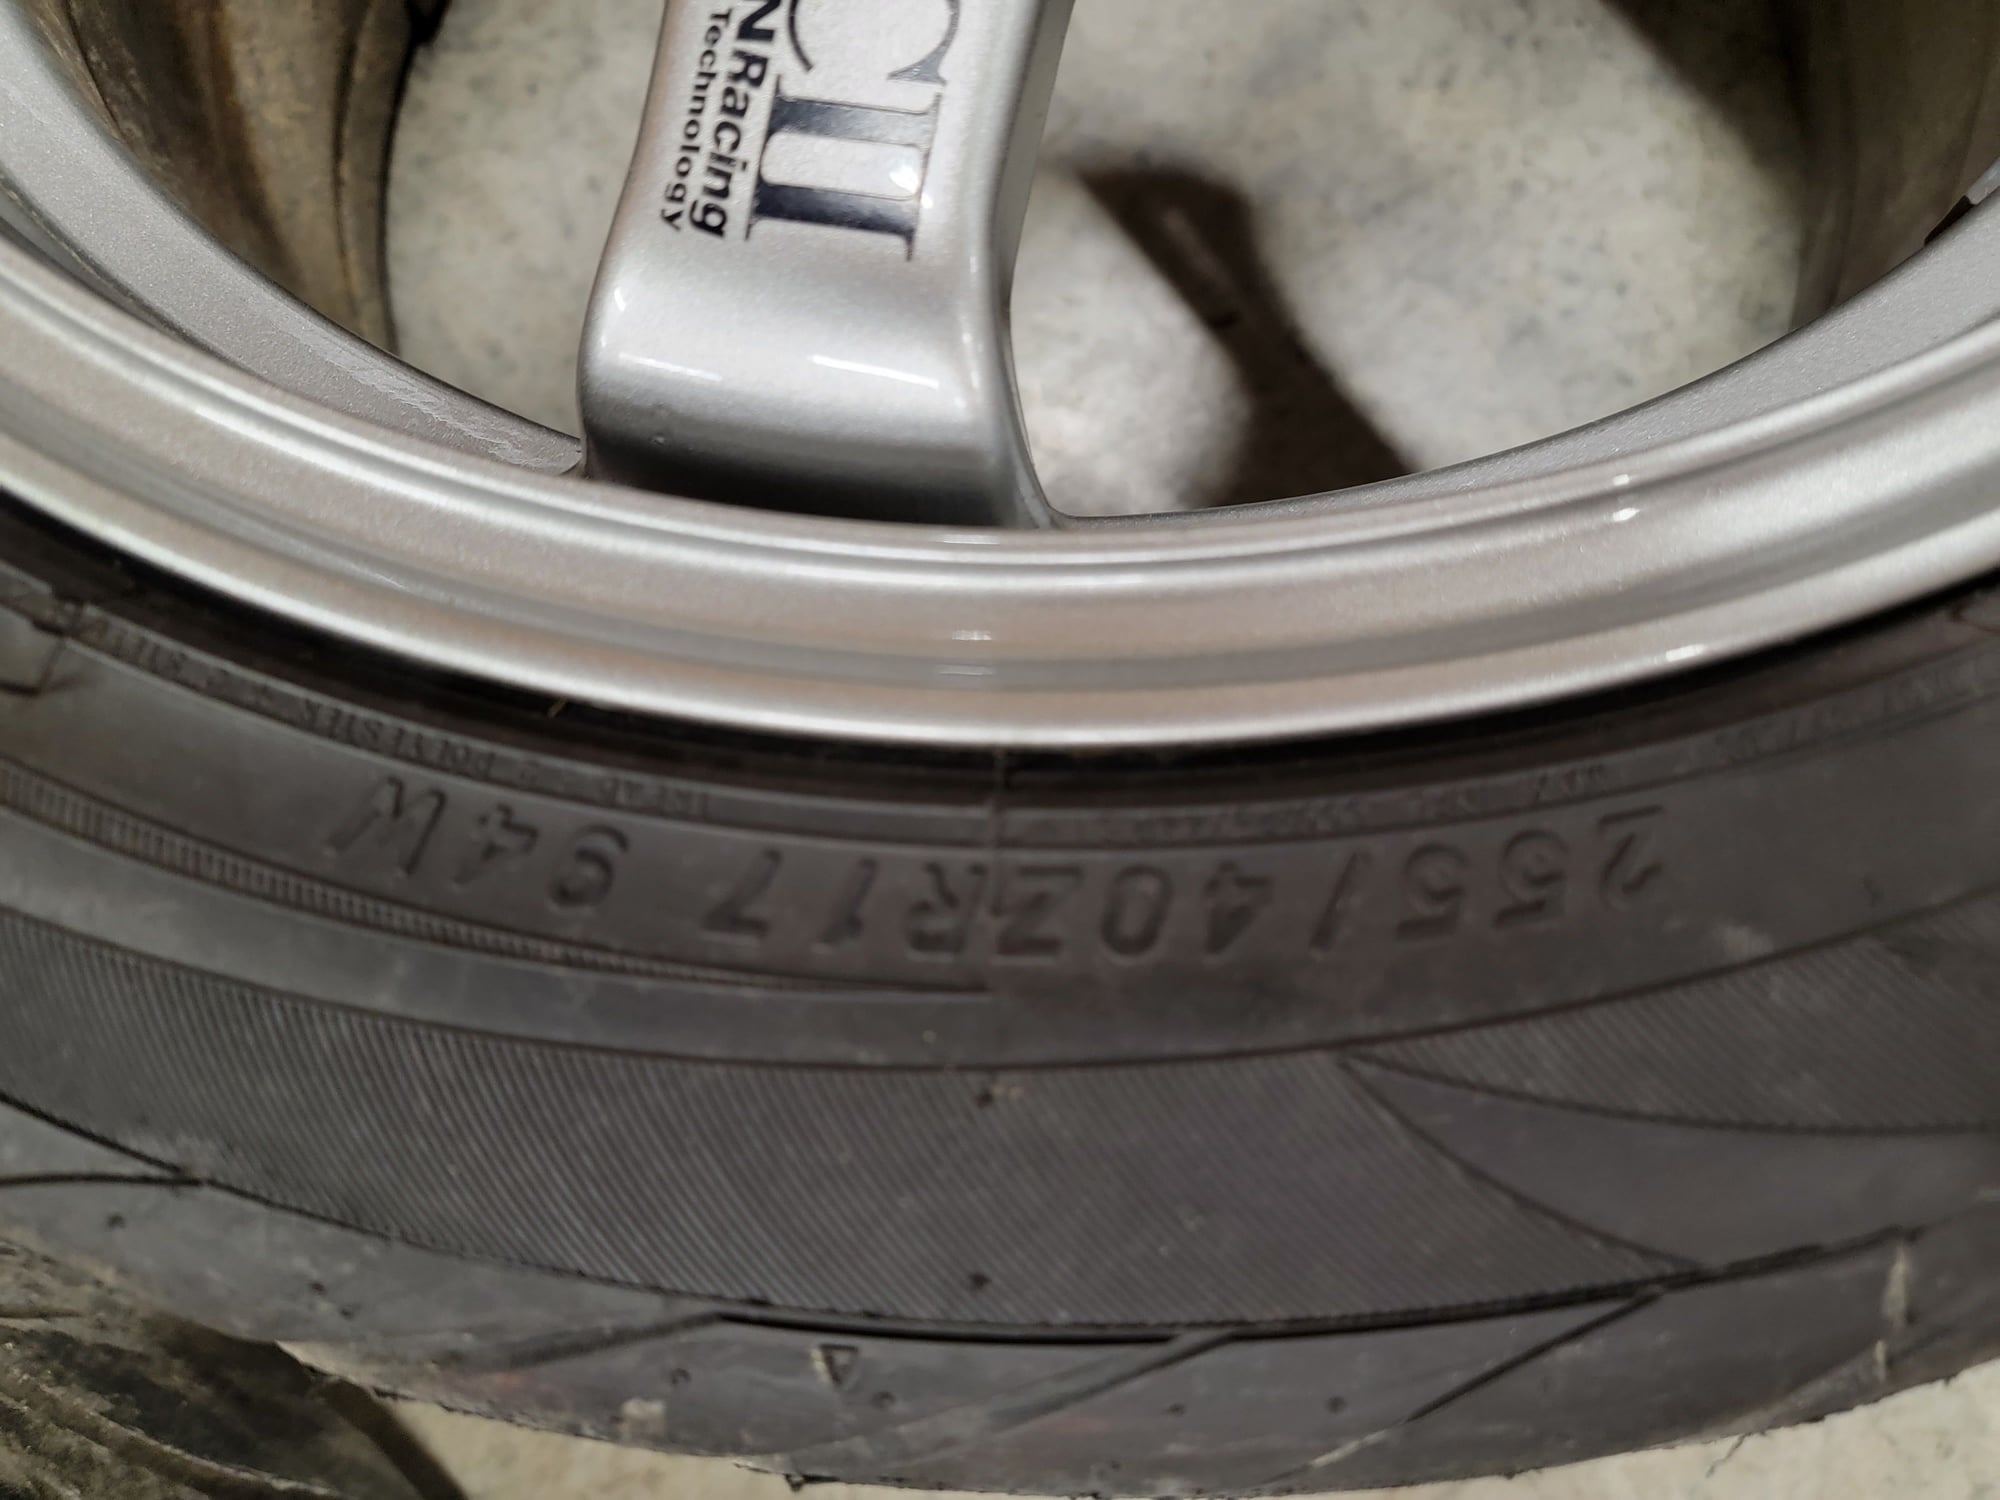 1994 Mazda RX-7 - Advan TC-2 Hollow Spokes - Wheels and Tires/Axles - $2,500 - West Harrison, IN 47060, United States